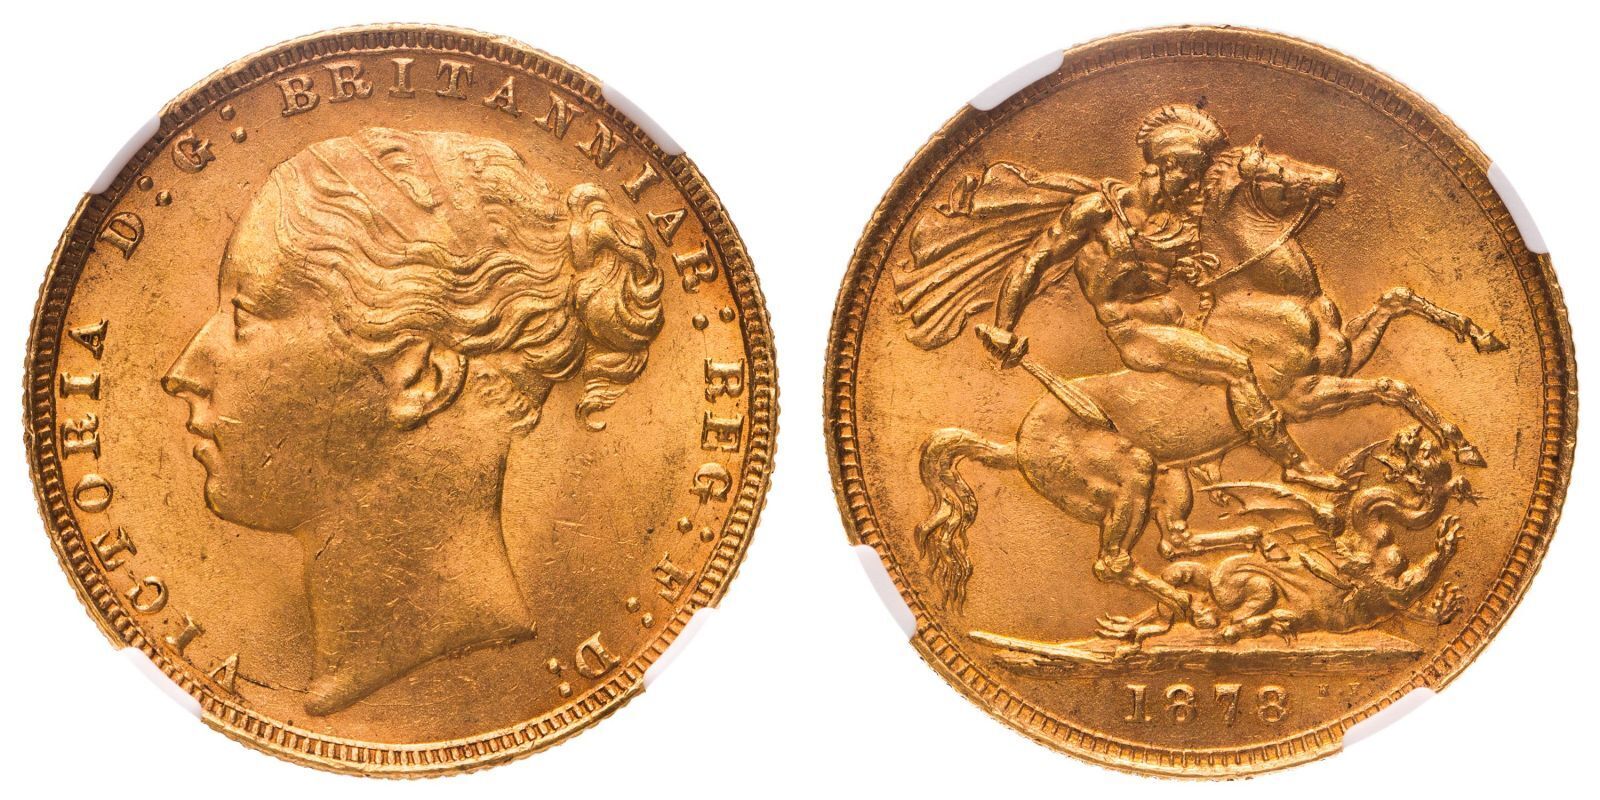 Lot 43: 1878 Gold Sovereign Single Finest NGC MS 64 #5791269-011 